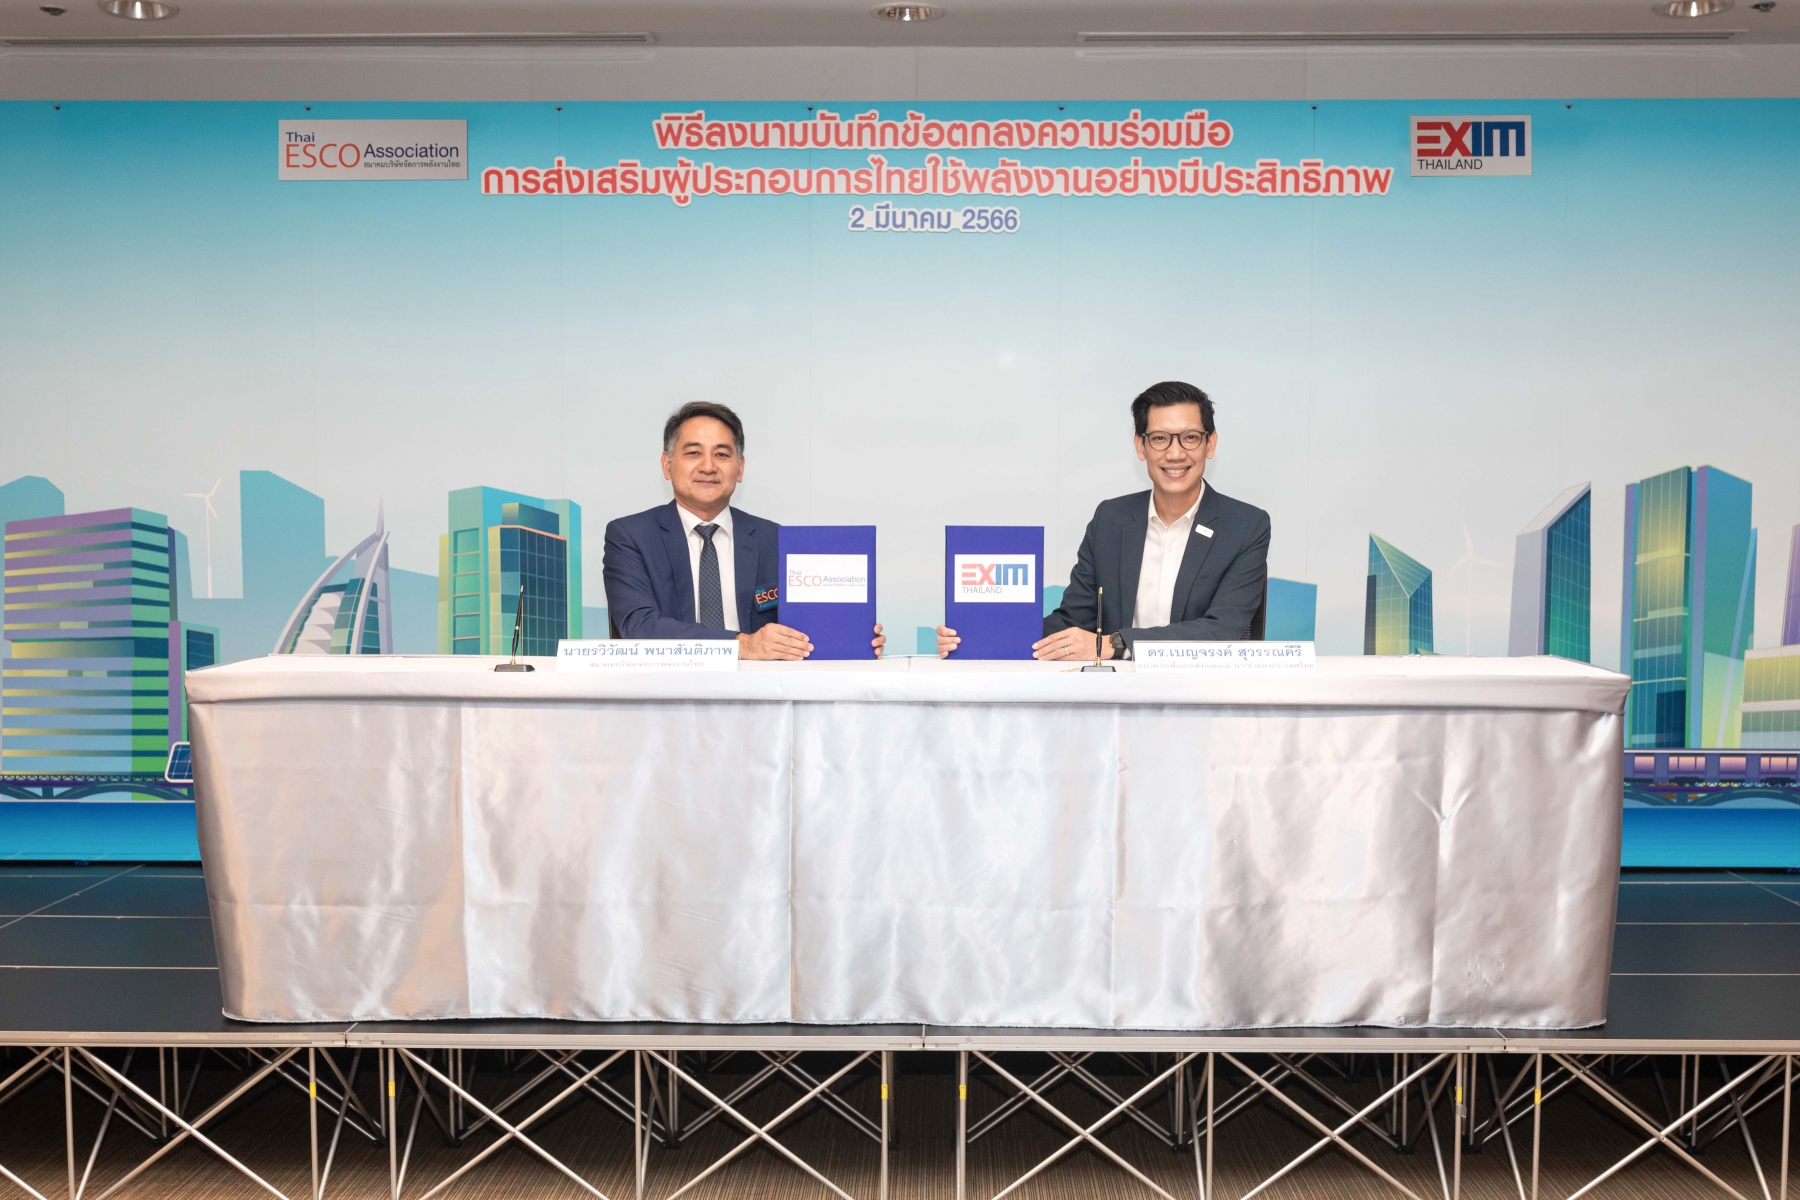 EXIM Thailand Joins Hands with ESCO in Promoting Clean Energy Efficiency of Thai Entrepreneurs to Uplift Competitiveness Sustainably toward Green Megatrends